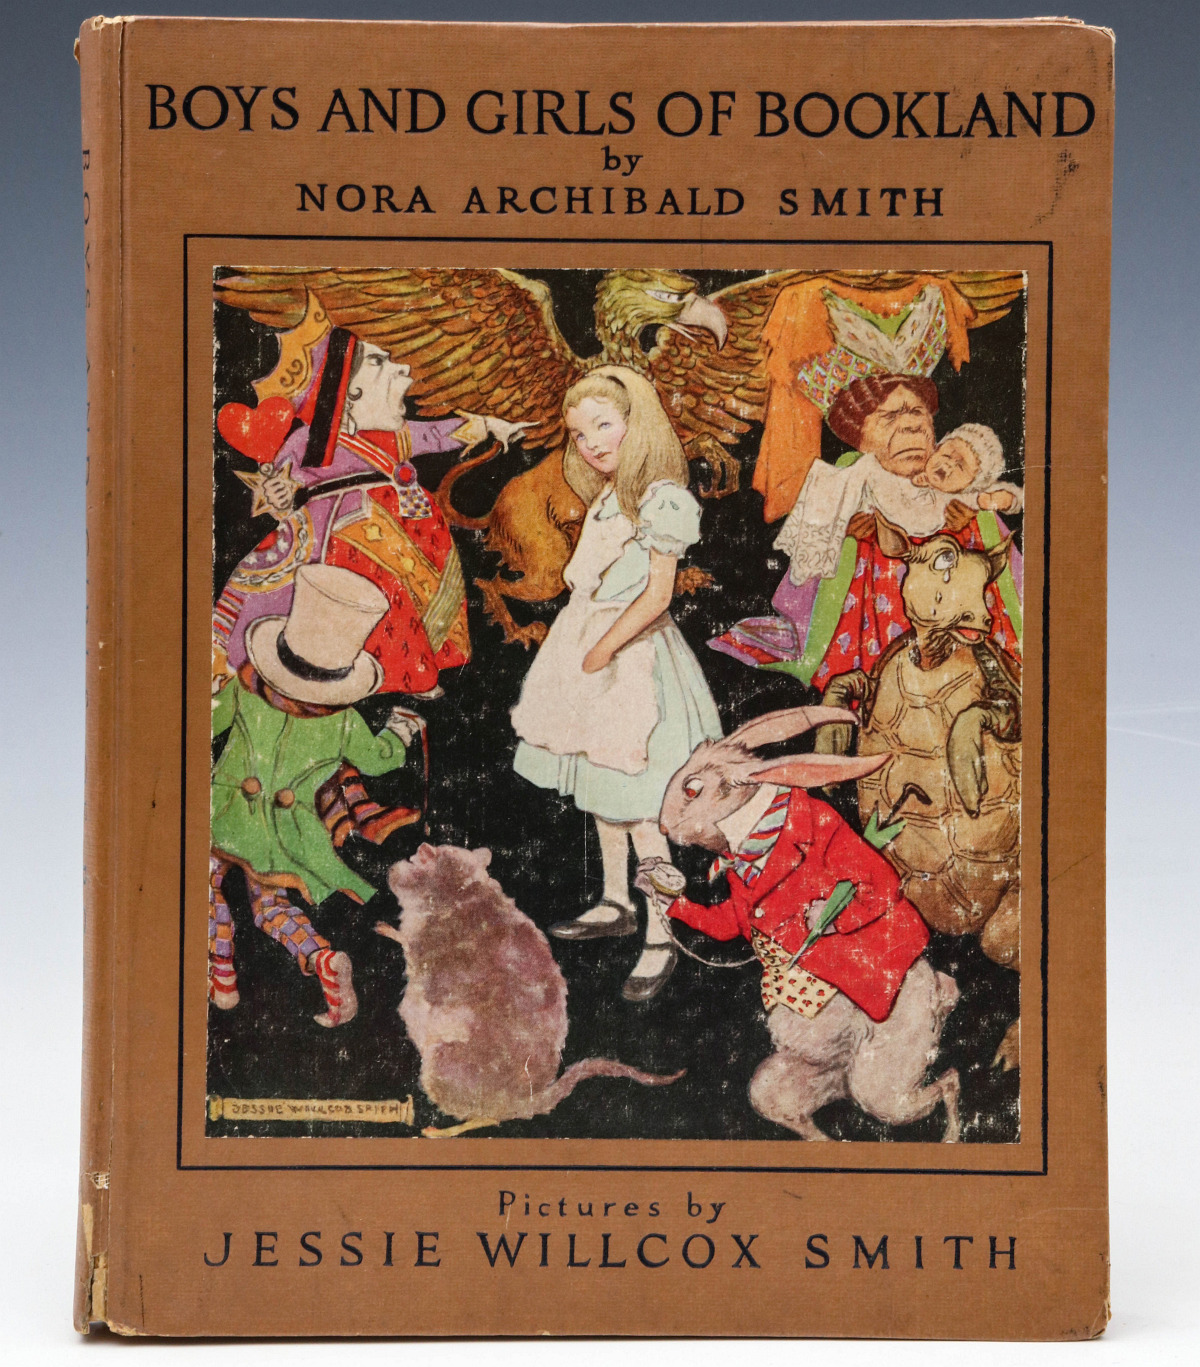 JESSE WILLCOX SMITH 'BOYS AND GIRLS OF BOOKLAND,' 1923